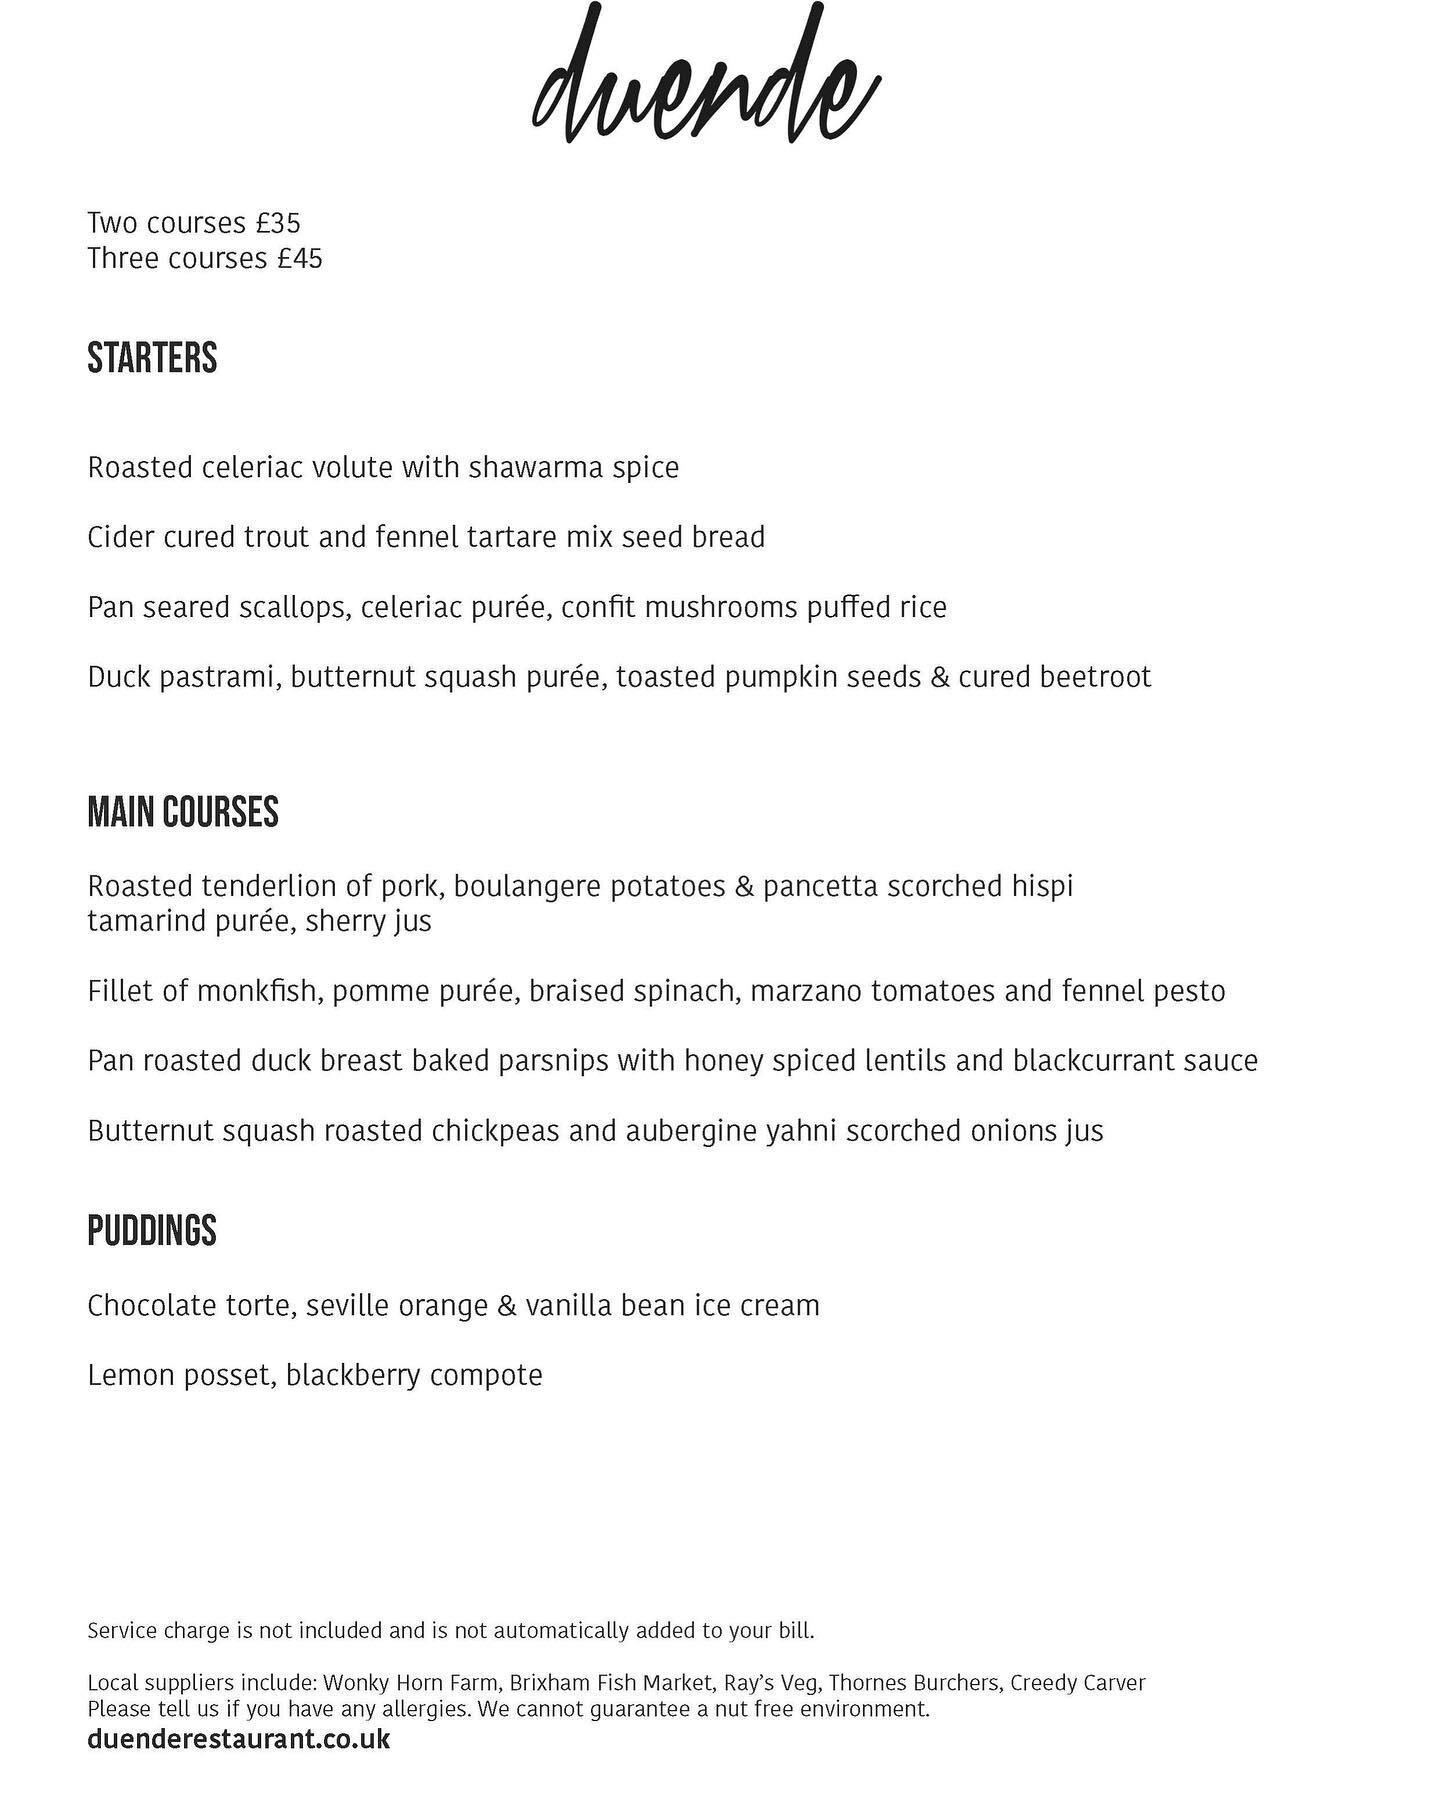 Here&rsquo;s the menu for this weekend that features my own cider-cured trout and duck pastrami that I showcased at @wonky_horn with @williamsitwell last weekend. There will also be scallops and monkfish from Brixham, and veggie options.#wiveliscombe